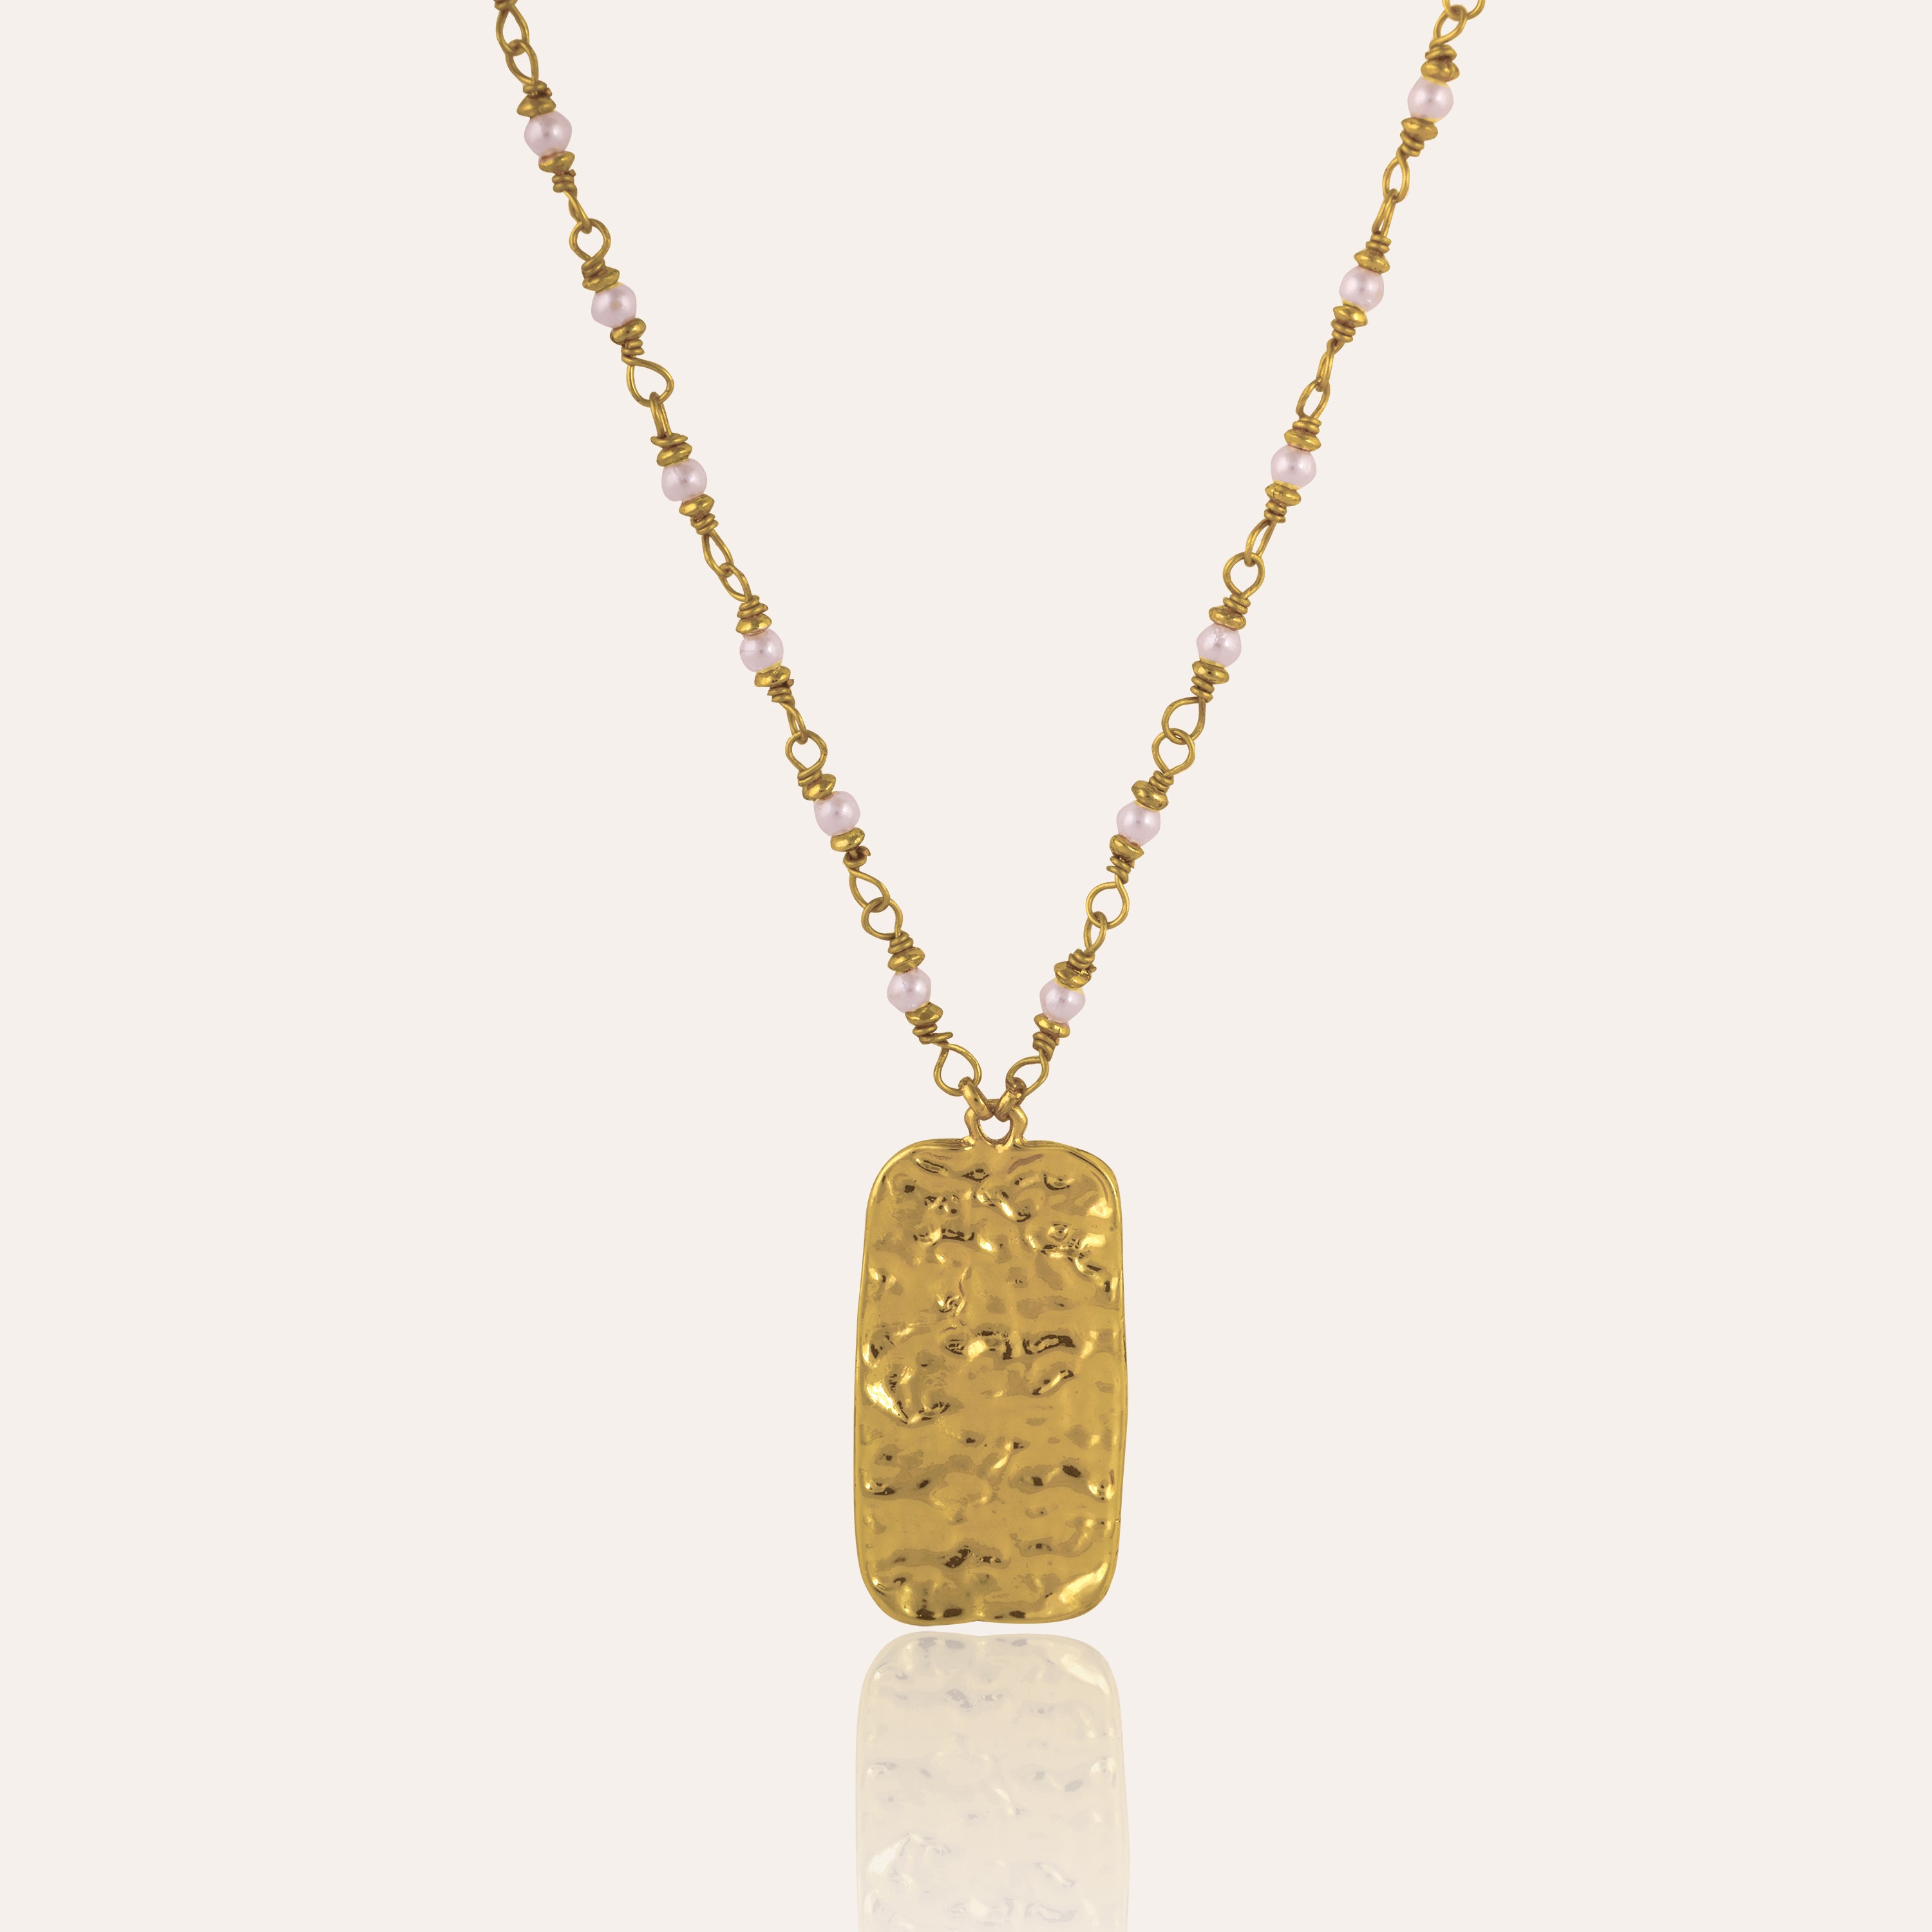 TFC Golden Tag Gold Plated Pendant Necklace-Enhance your elegance with our collection of gold-plated necklaces for women. Choose from stunning pendant necklaces, chic choker necklaces, and trendy layered necklaces. Our sleek and dainty designs are both affordable and anti-tarnish, ensuring lasting beauty. Enjoy the cheapest fashion jewellery, lightweight and stylish- only at The Fun Company